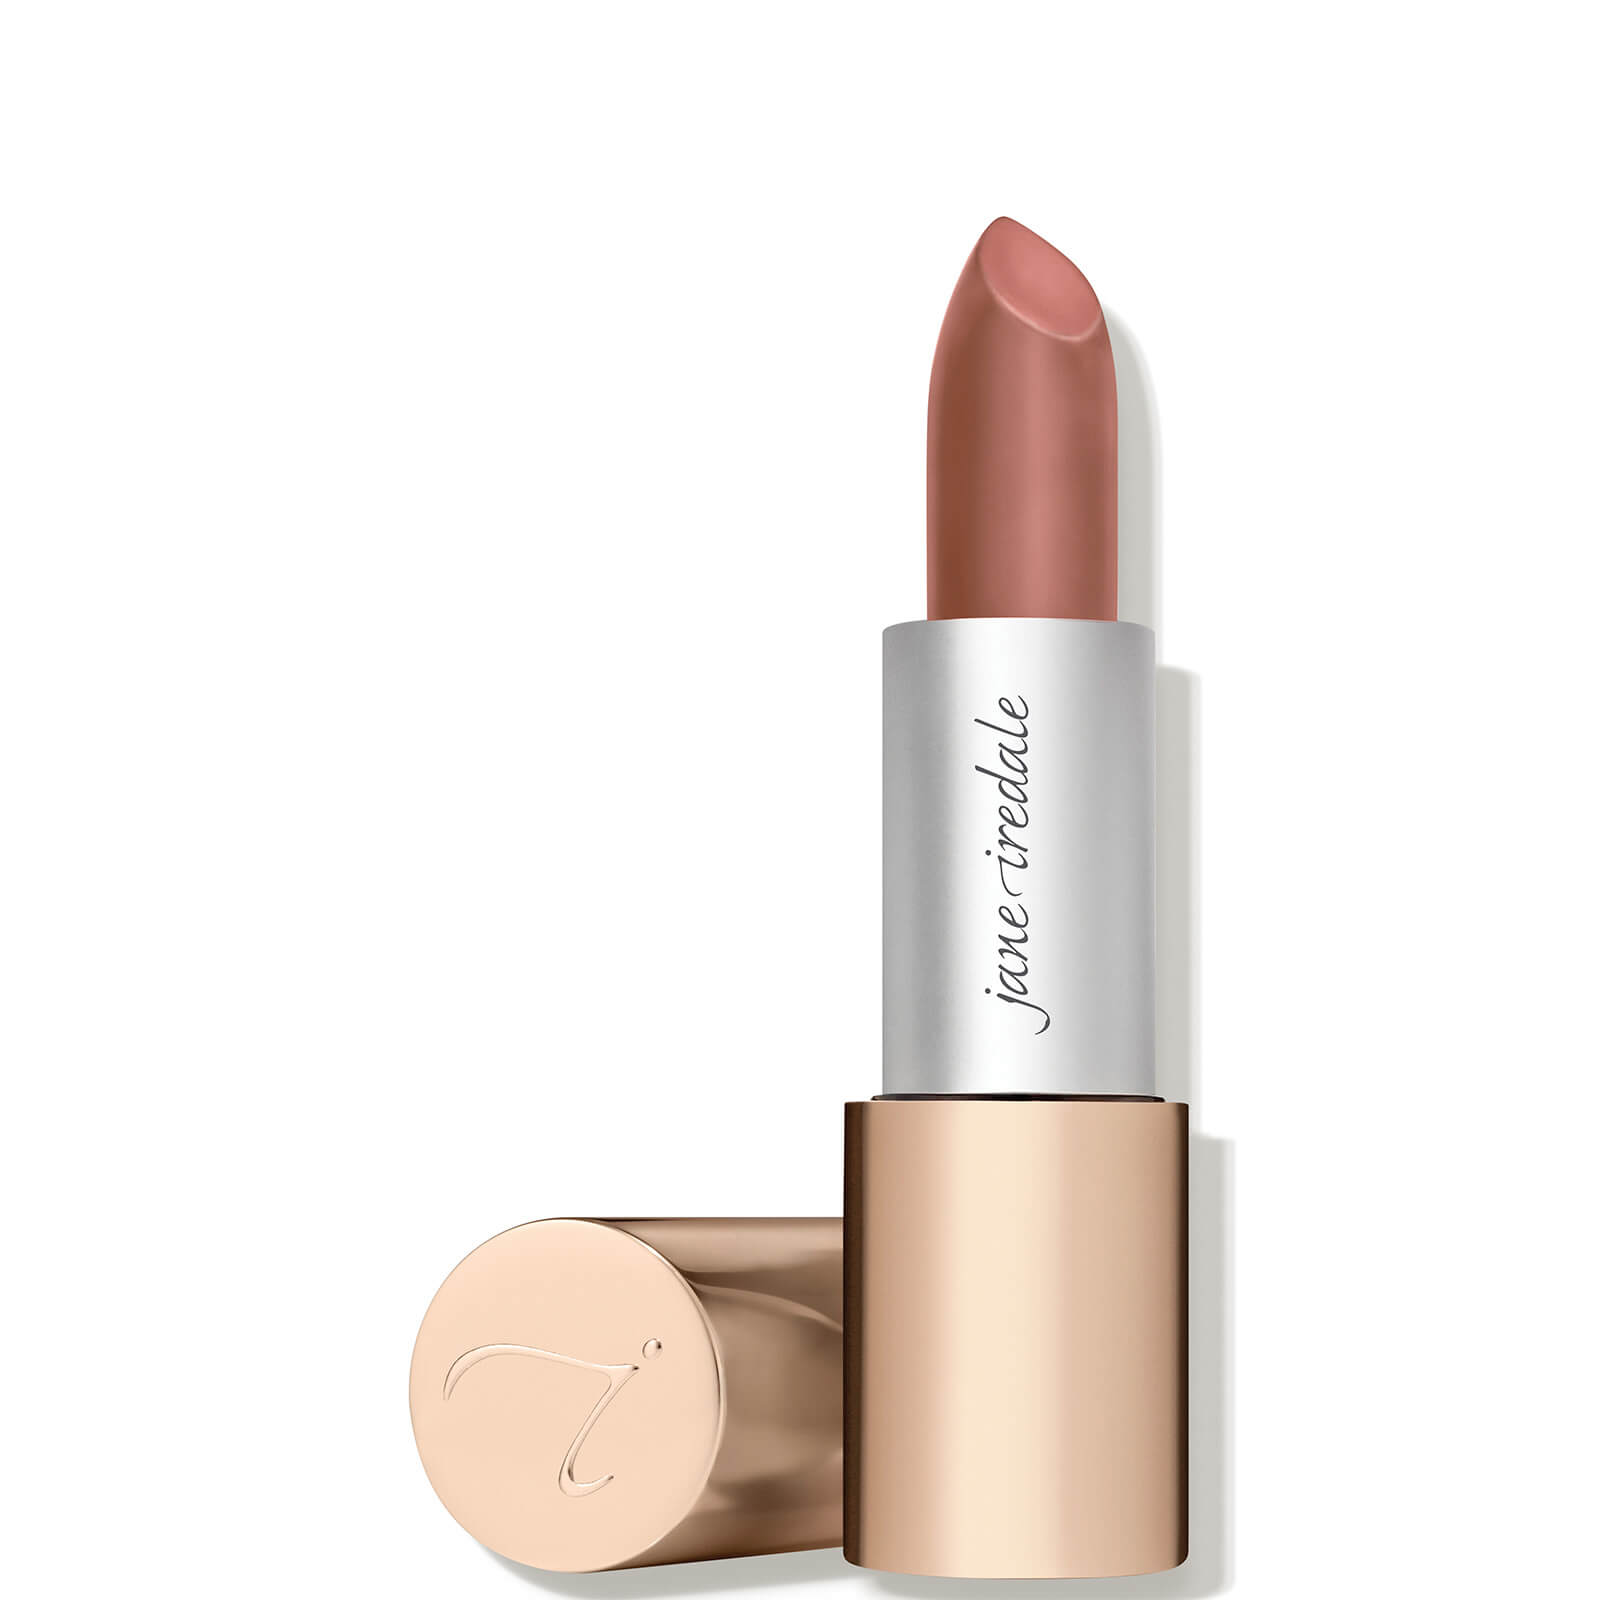 jane iredale Triple Luxe Long Lasting Naturally Moist Lipstick 3.4g (Various Shades) - Molly